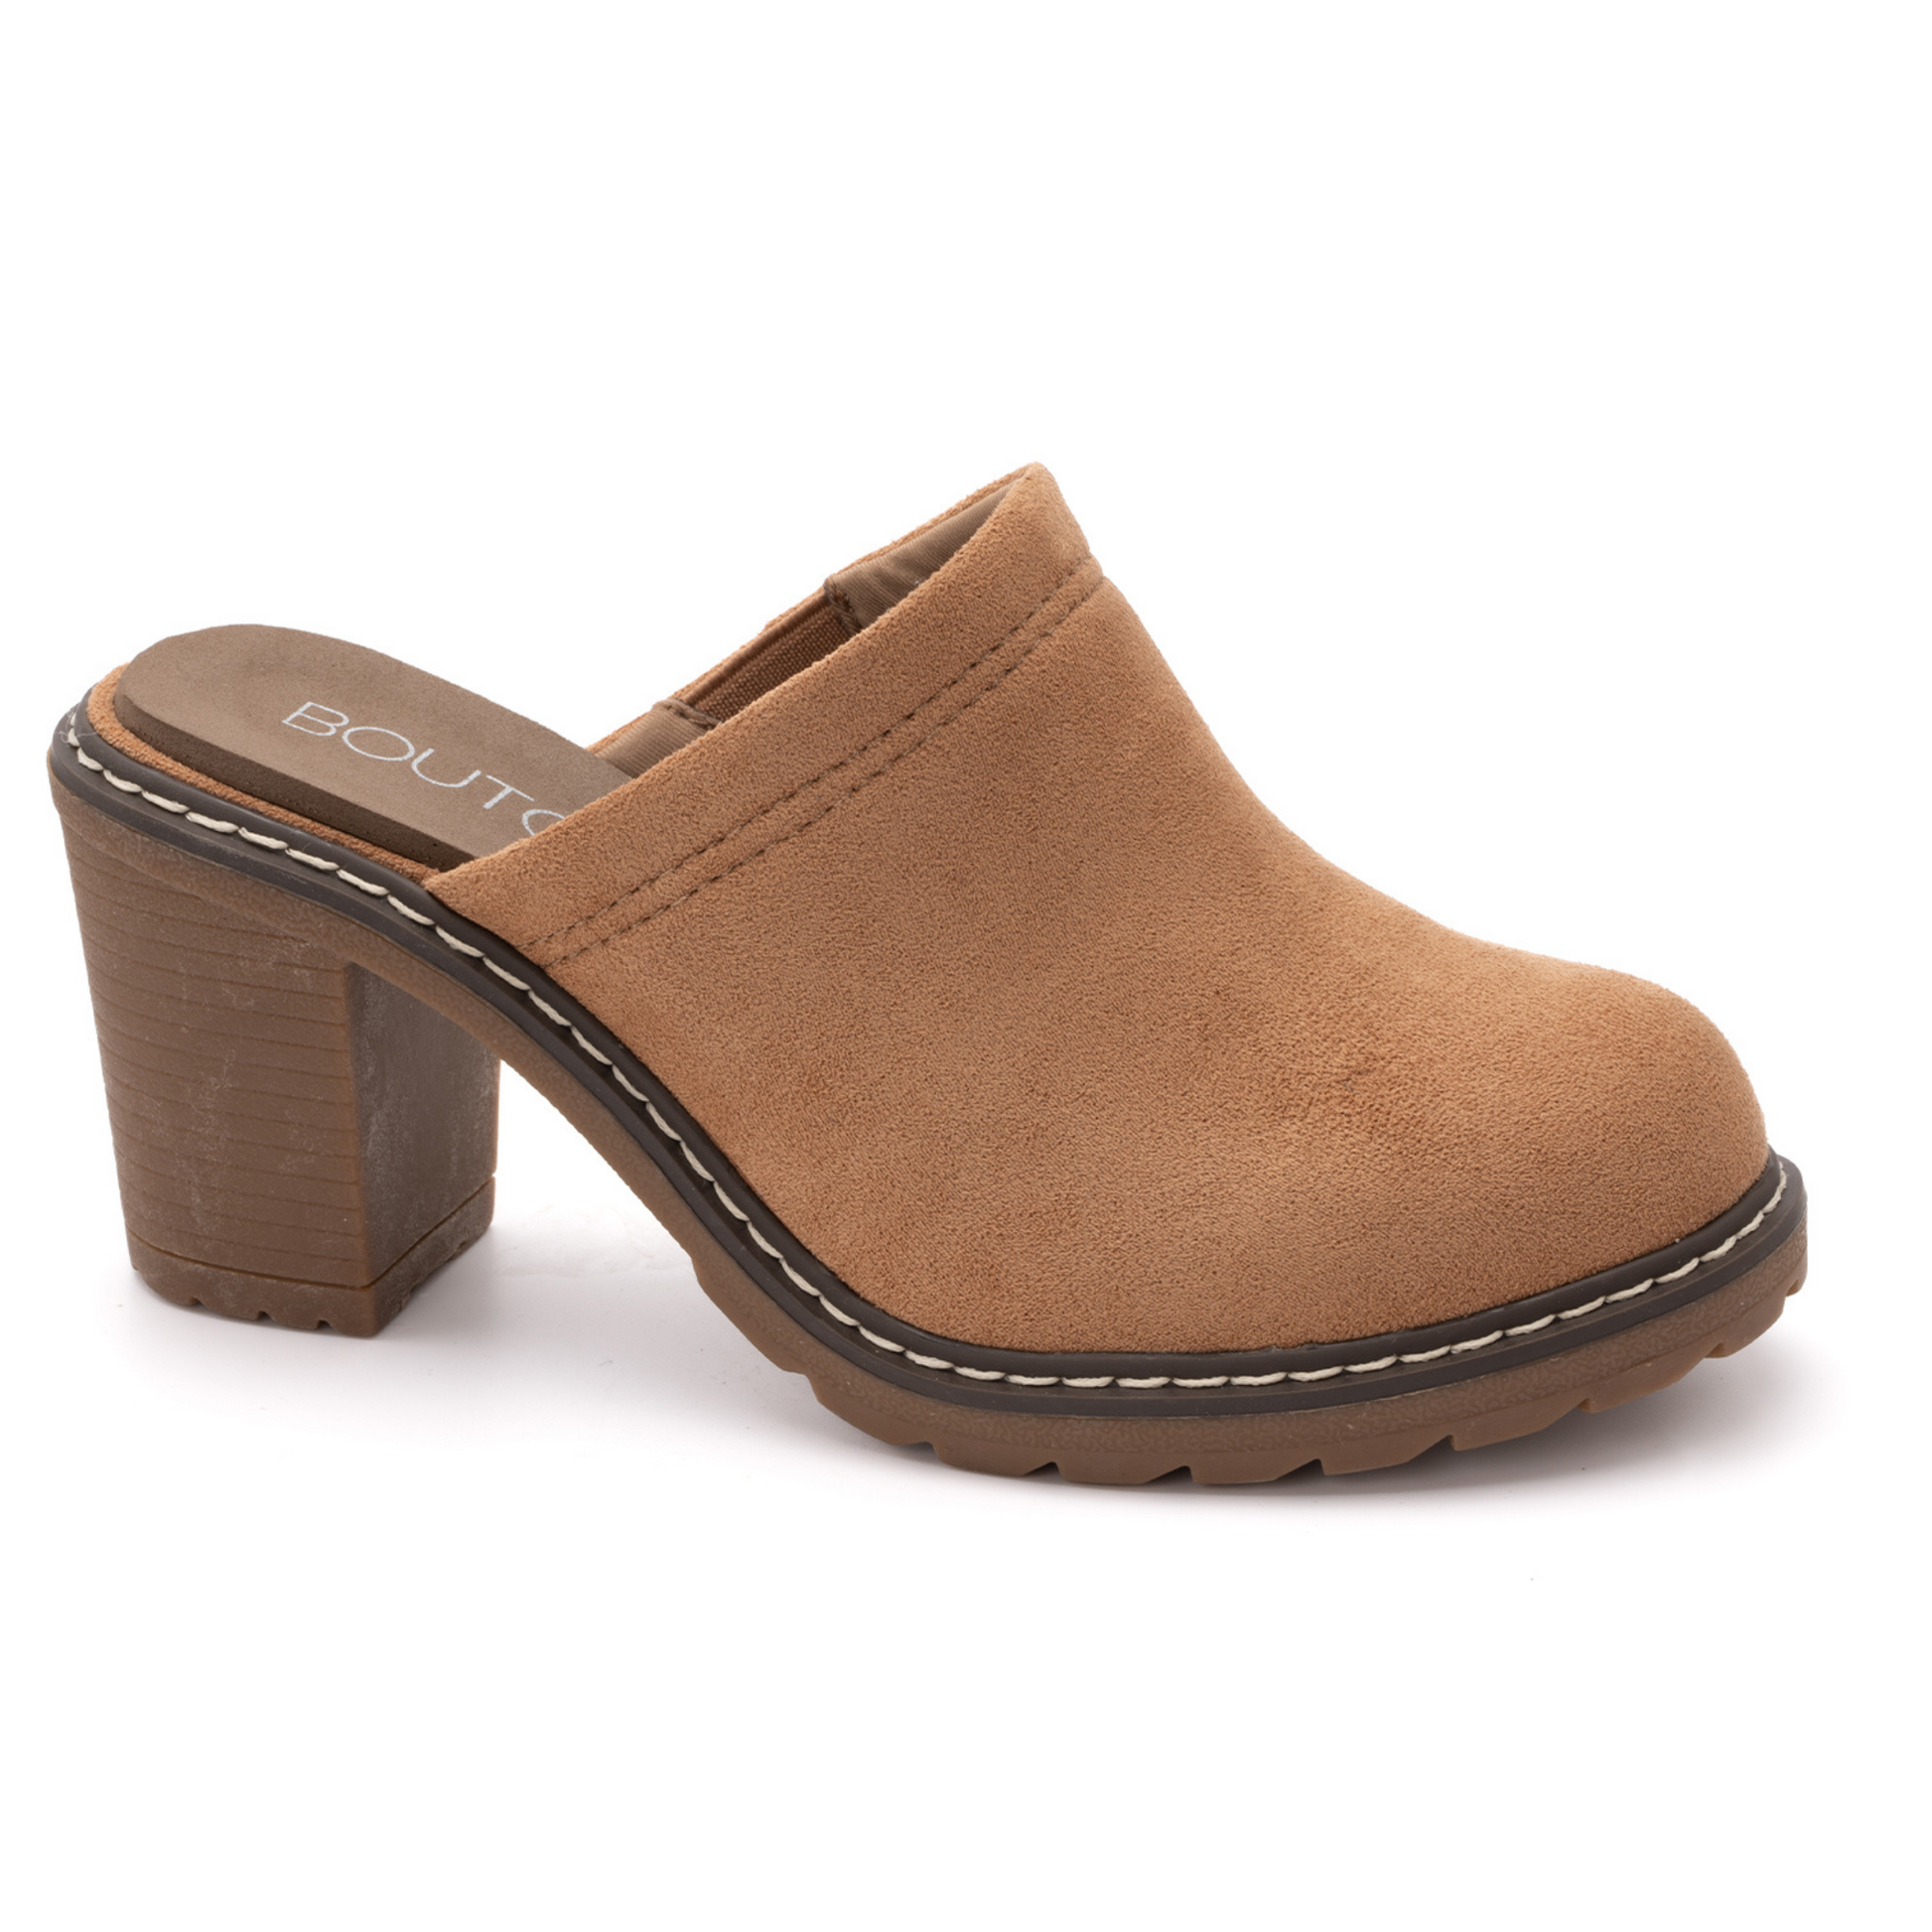 The Lantern is a timeless style crafted with luxurious brown suede. It is a mule design with a wedge heel and open back, making it a versatile and unique choice. Offering a modern take on classic design, the Lantern is sure to accessorize any look.